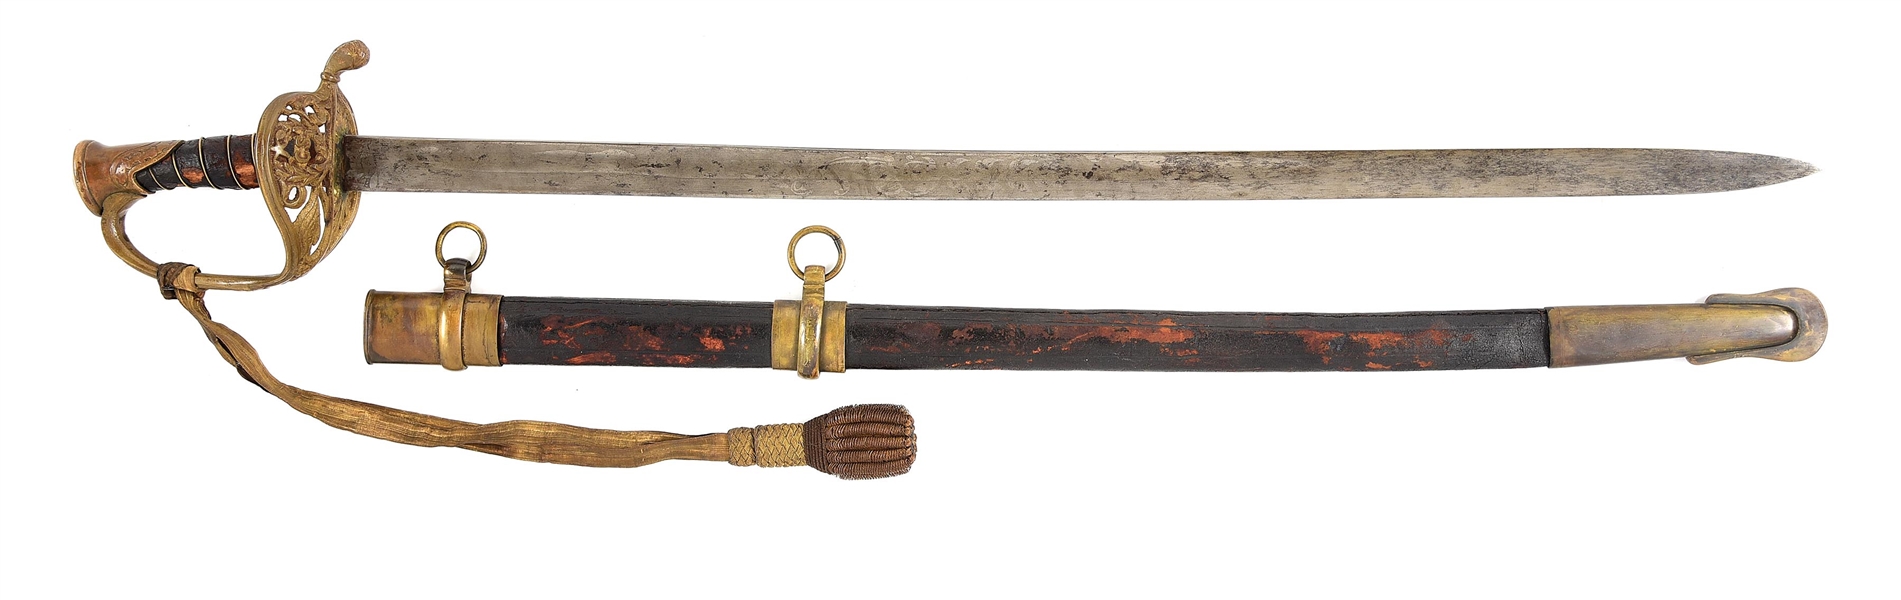 BOYLE & GAMBLE STAFF OFFICERS SWORD INSCRIBED TO COLONEL THOMAS SMITH RHETT, COMMAND OF RICHMOND DEFENSES AND CHIEF OF ARTILLERY, CSA.